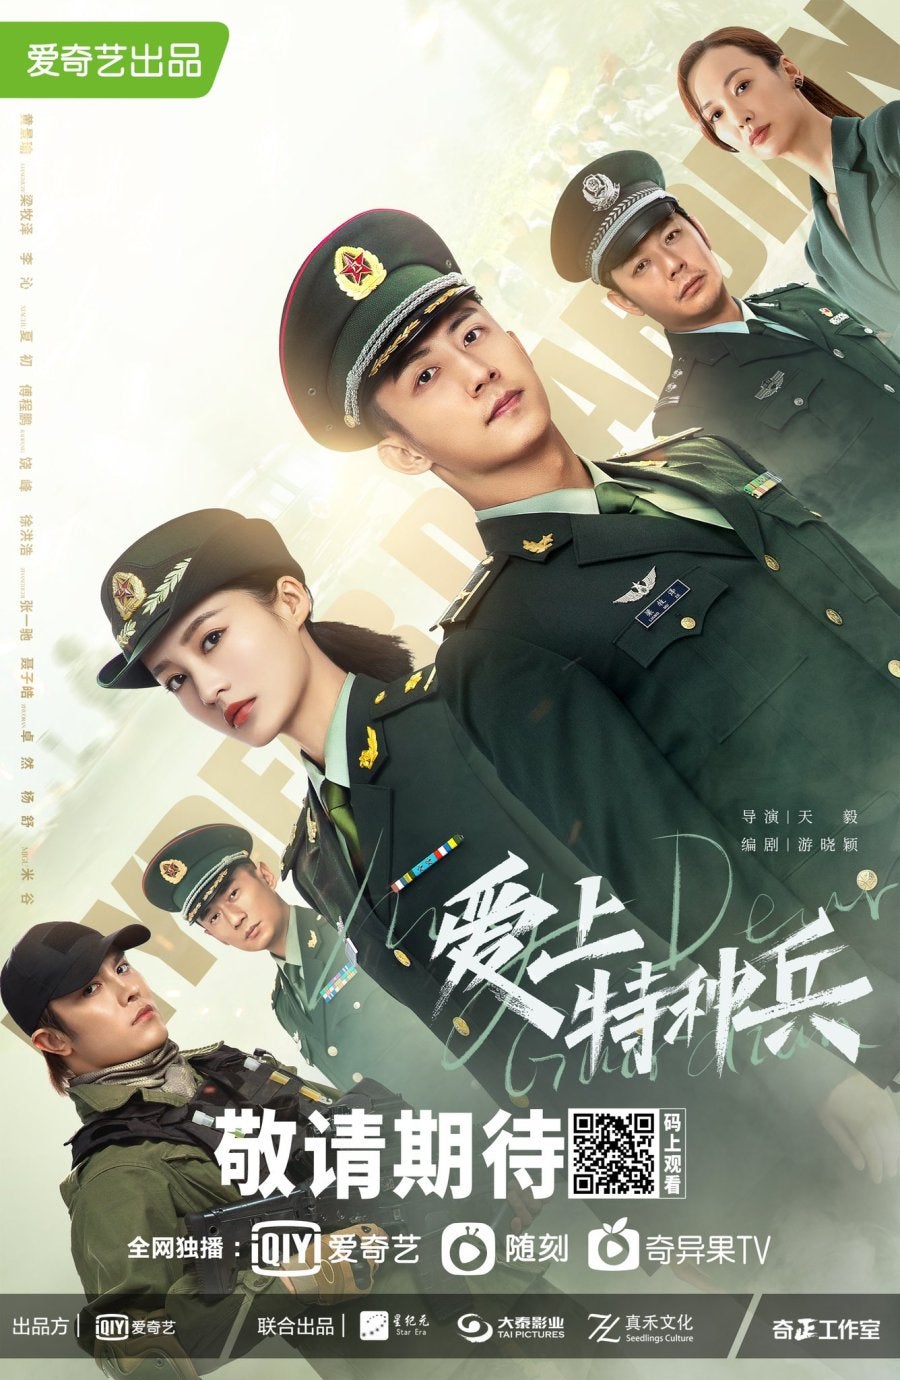 TV ratings for My Dear Guardian (亲爱的戎装) in the United Kingdom. iqiyi TV series